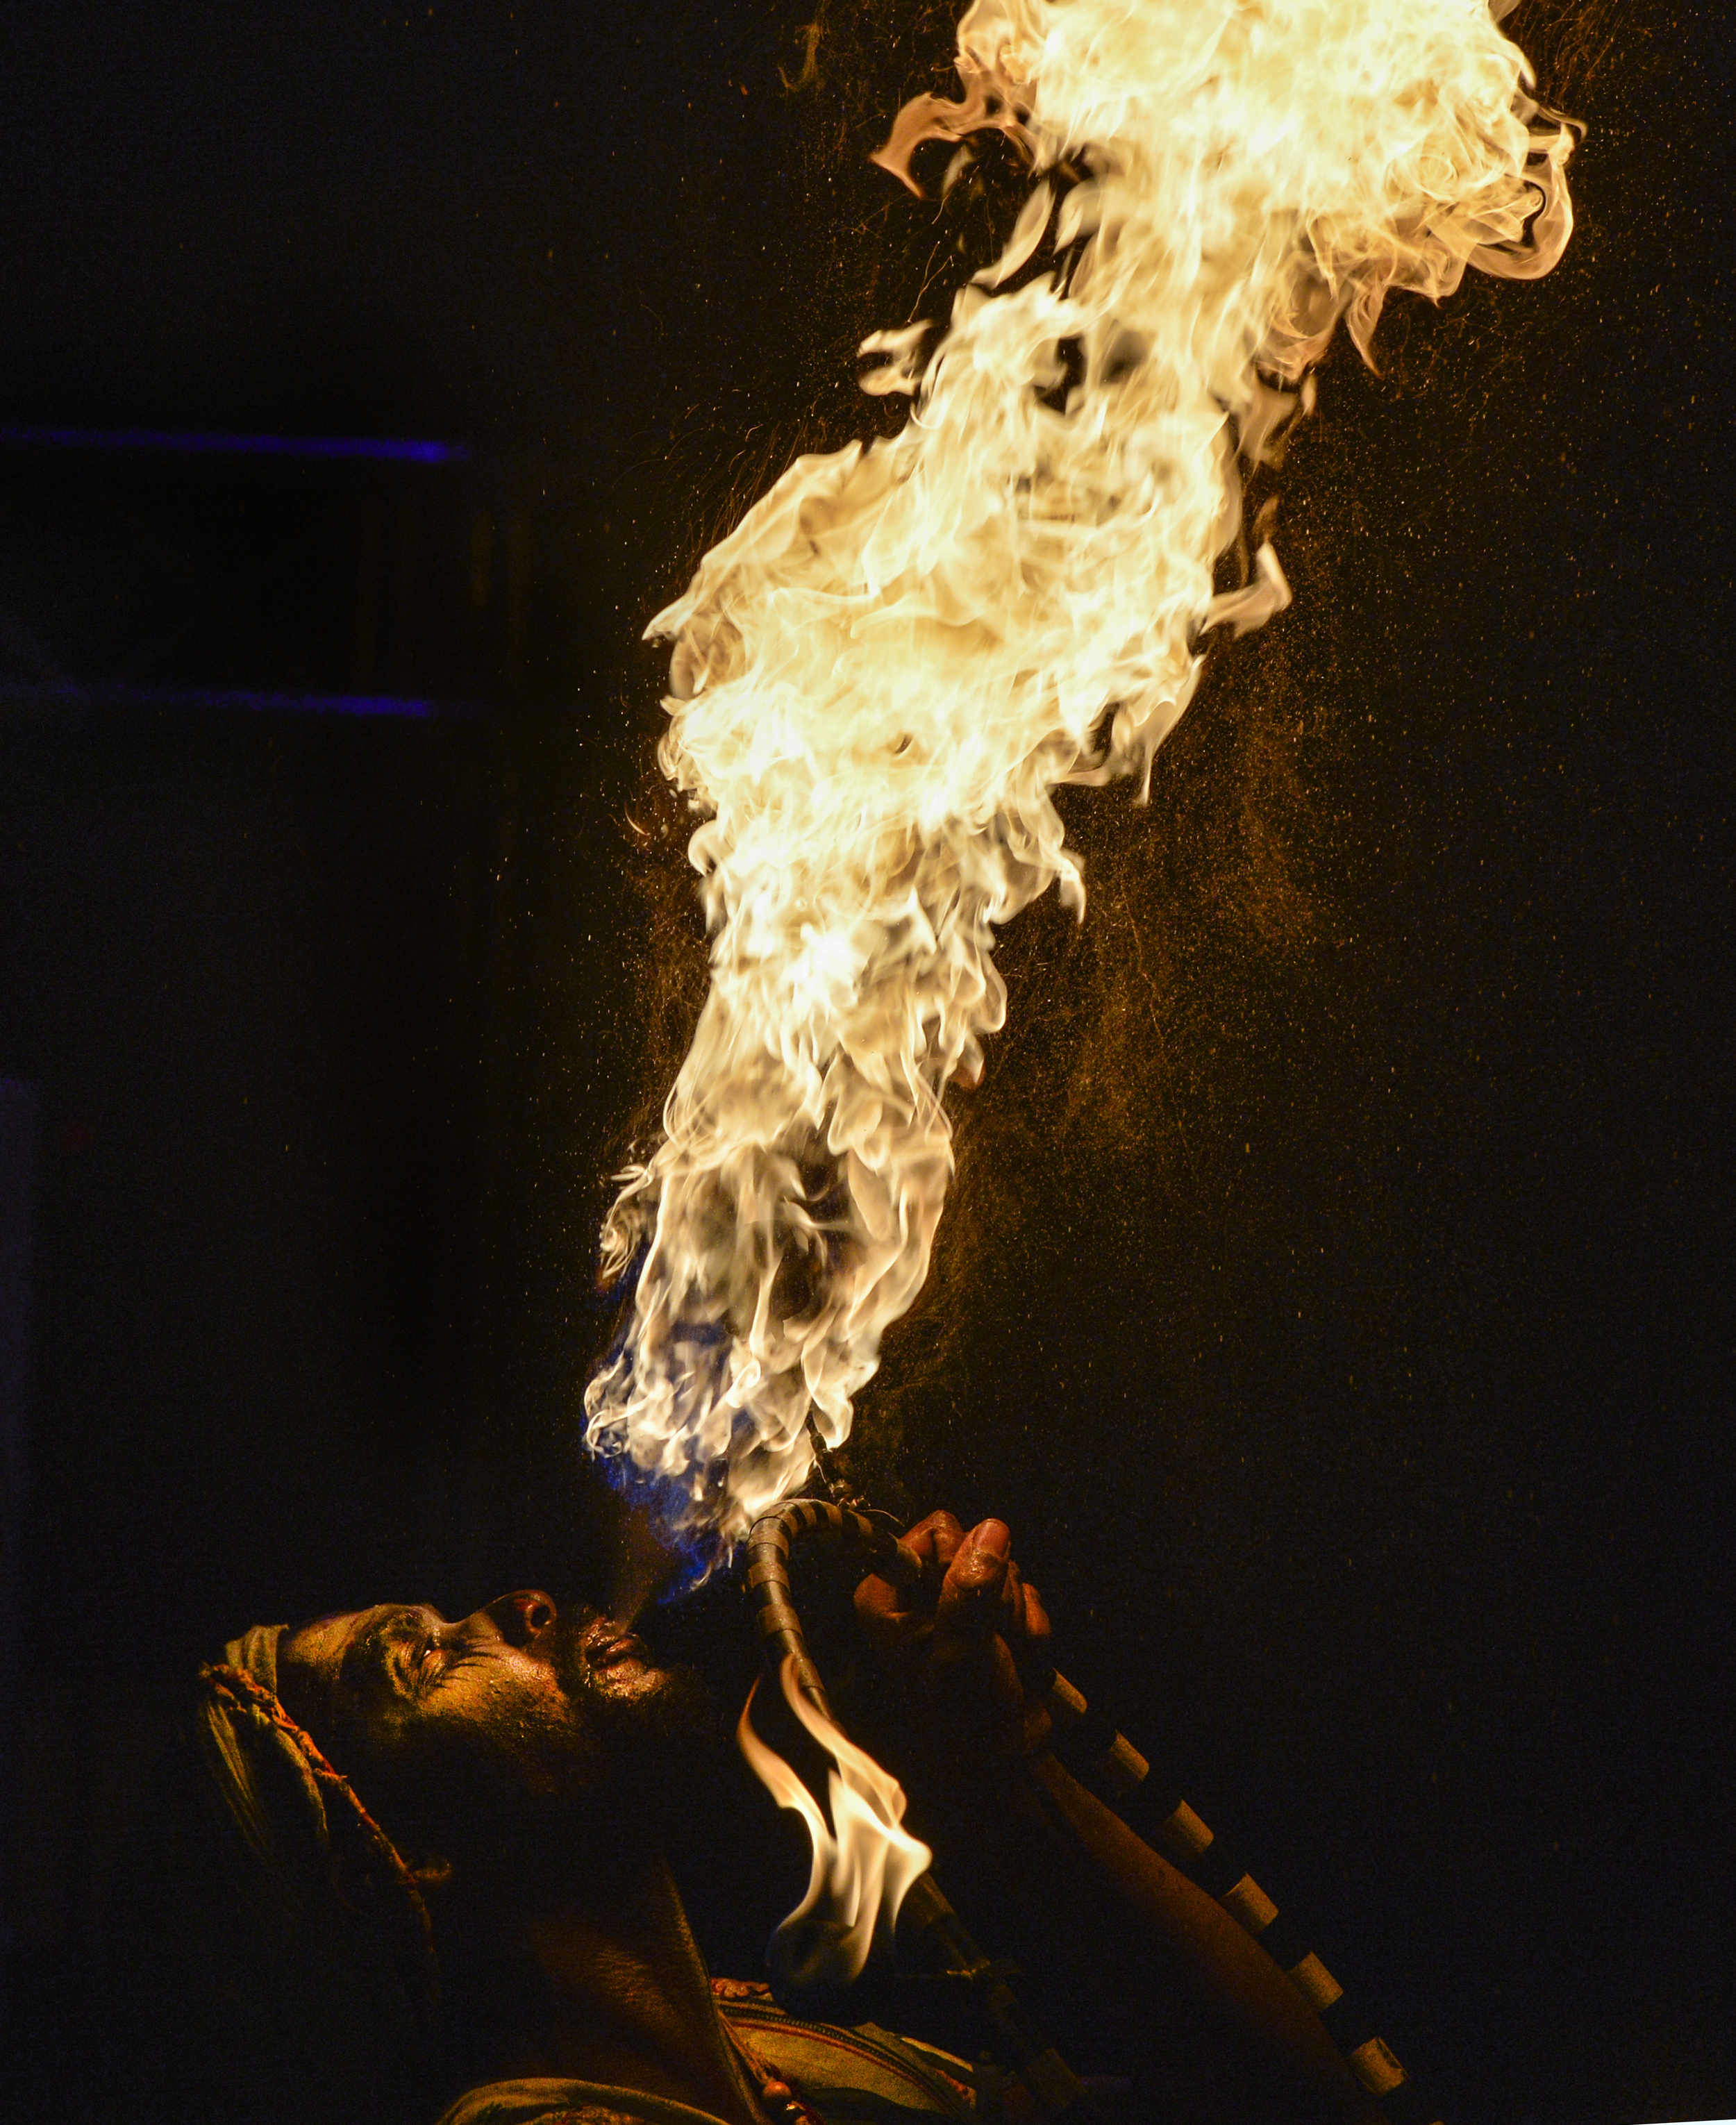  Solar Greye blows fire to end a performance at the Queen Mary's Dark Harbor which opens this weekend in Long Beach CA. Thursday October 1, 2015.  